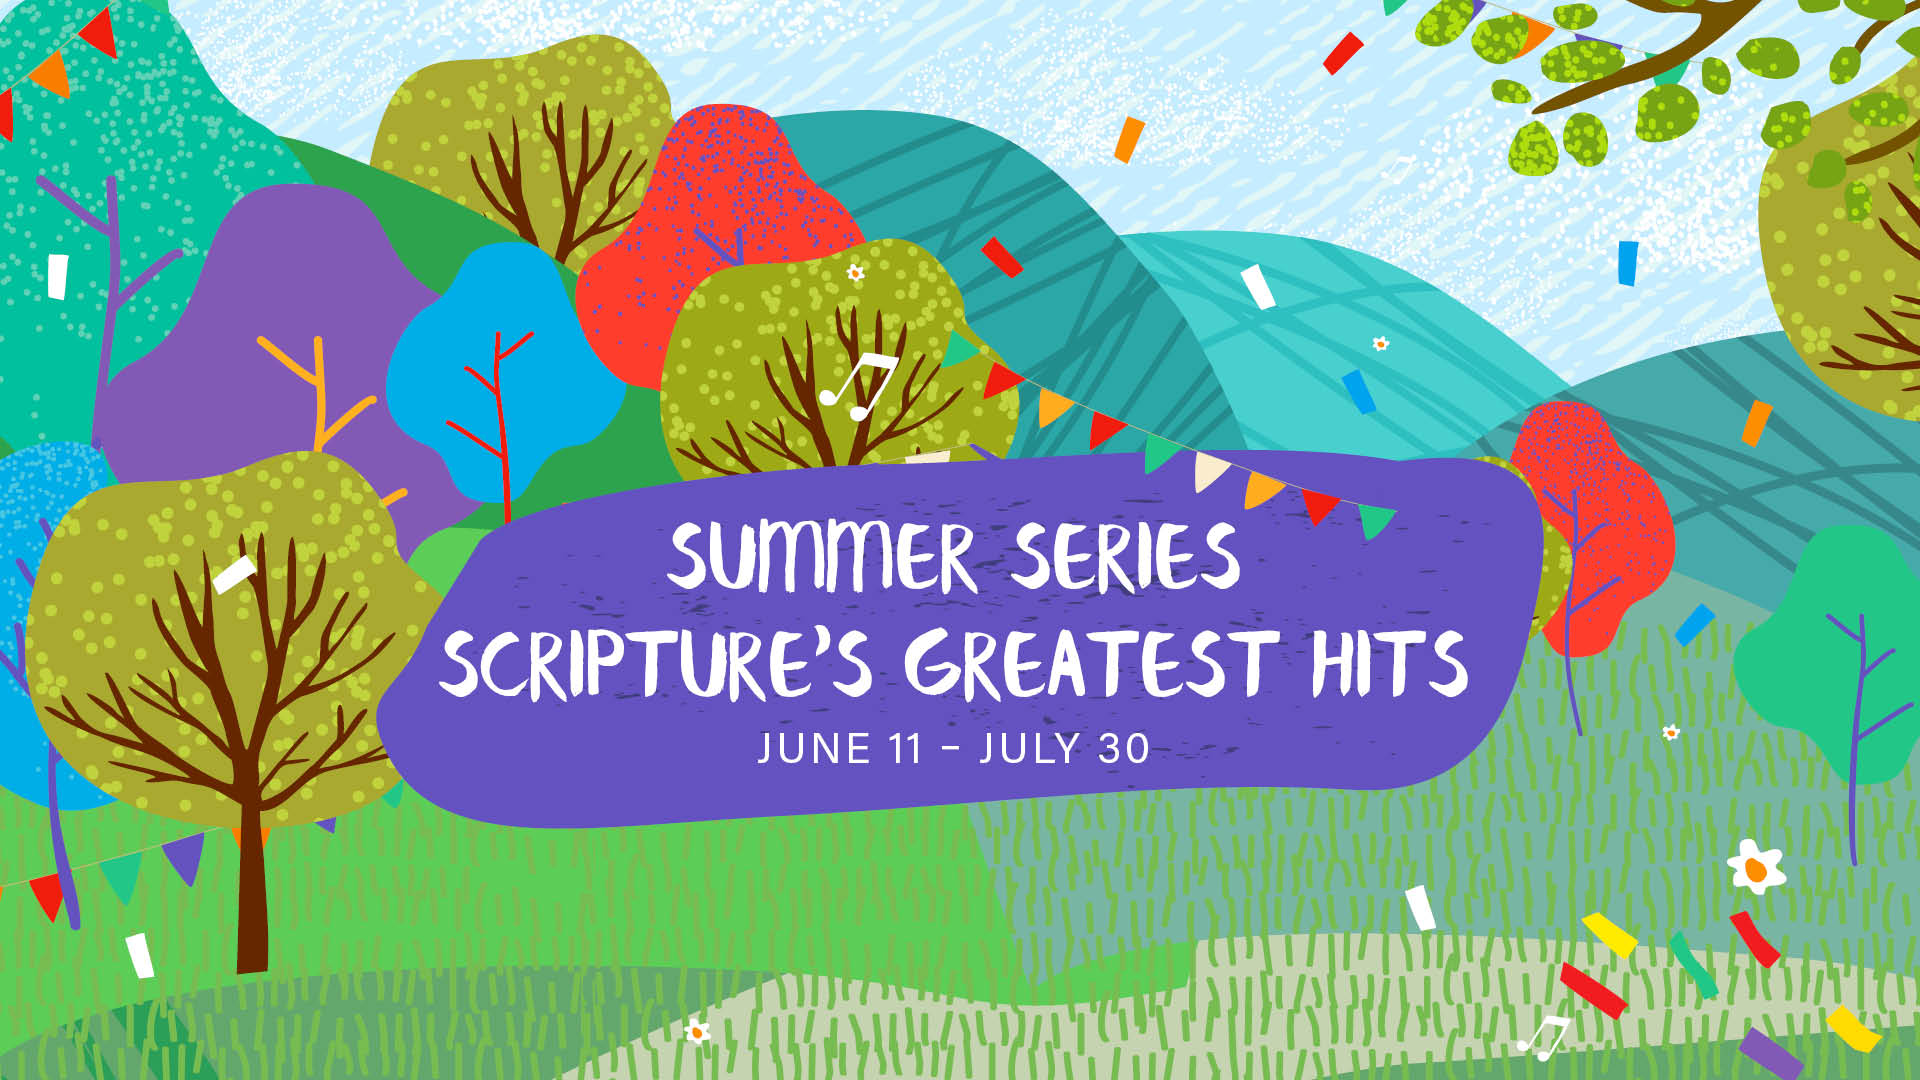 Summer Series: Scriptures Greatest Hits